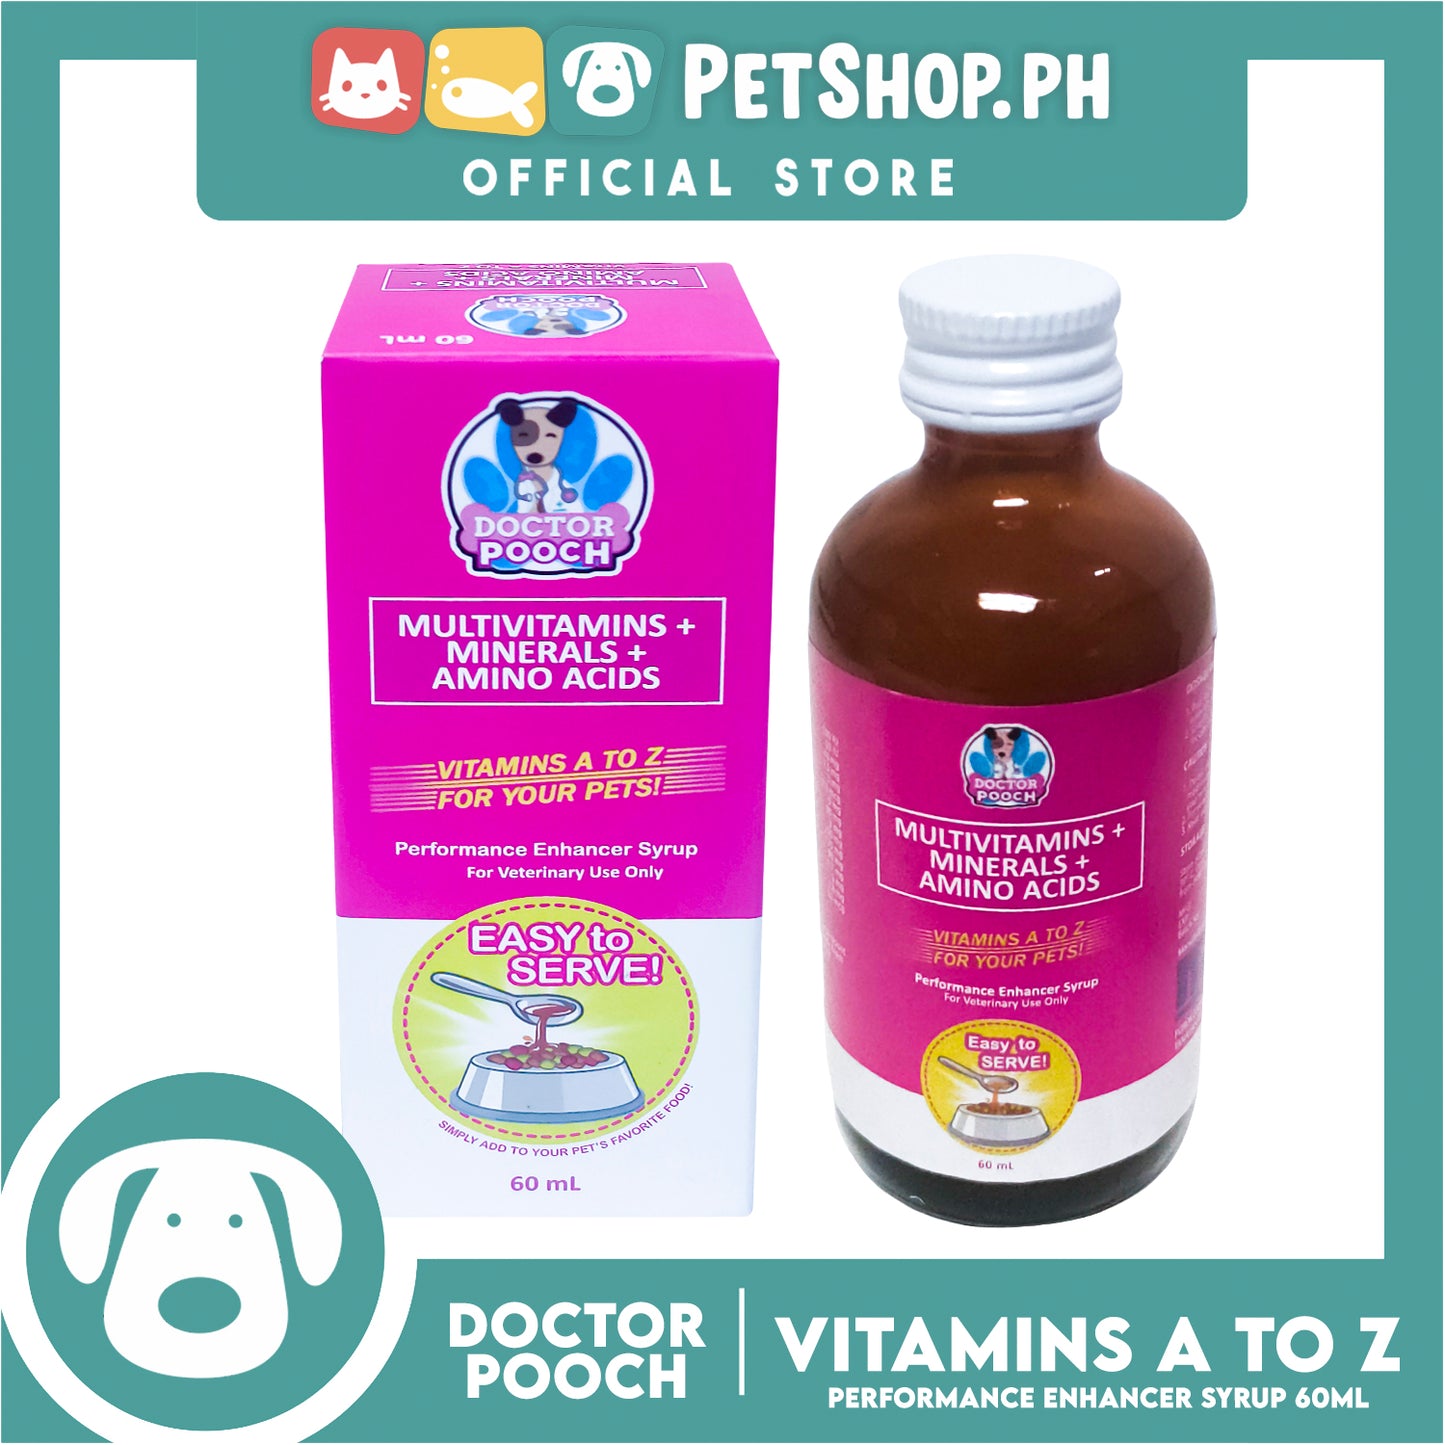 Doctor Pooch Multivitamins, Mineral And Amino Acids 60ml (Vitamins A to Z) Performance Enhancer Syrup For Your Pets